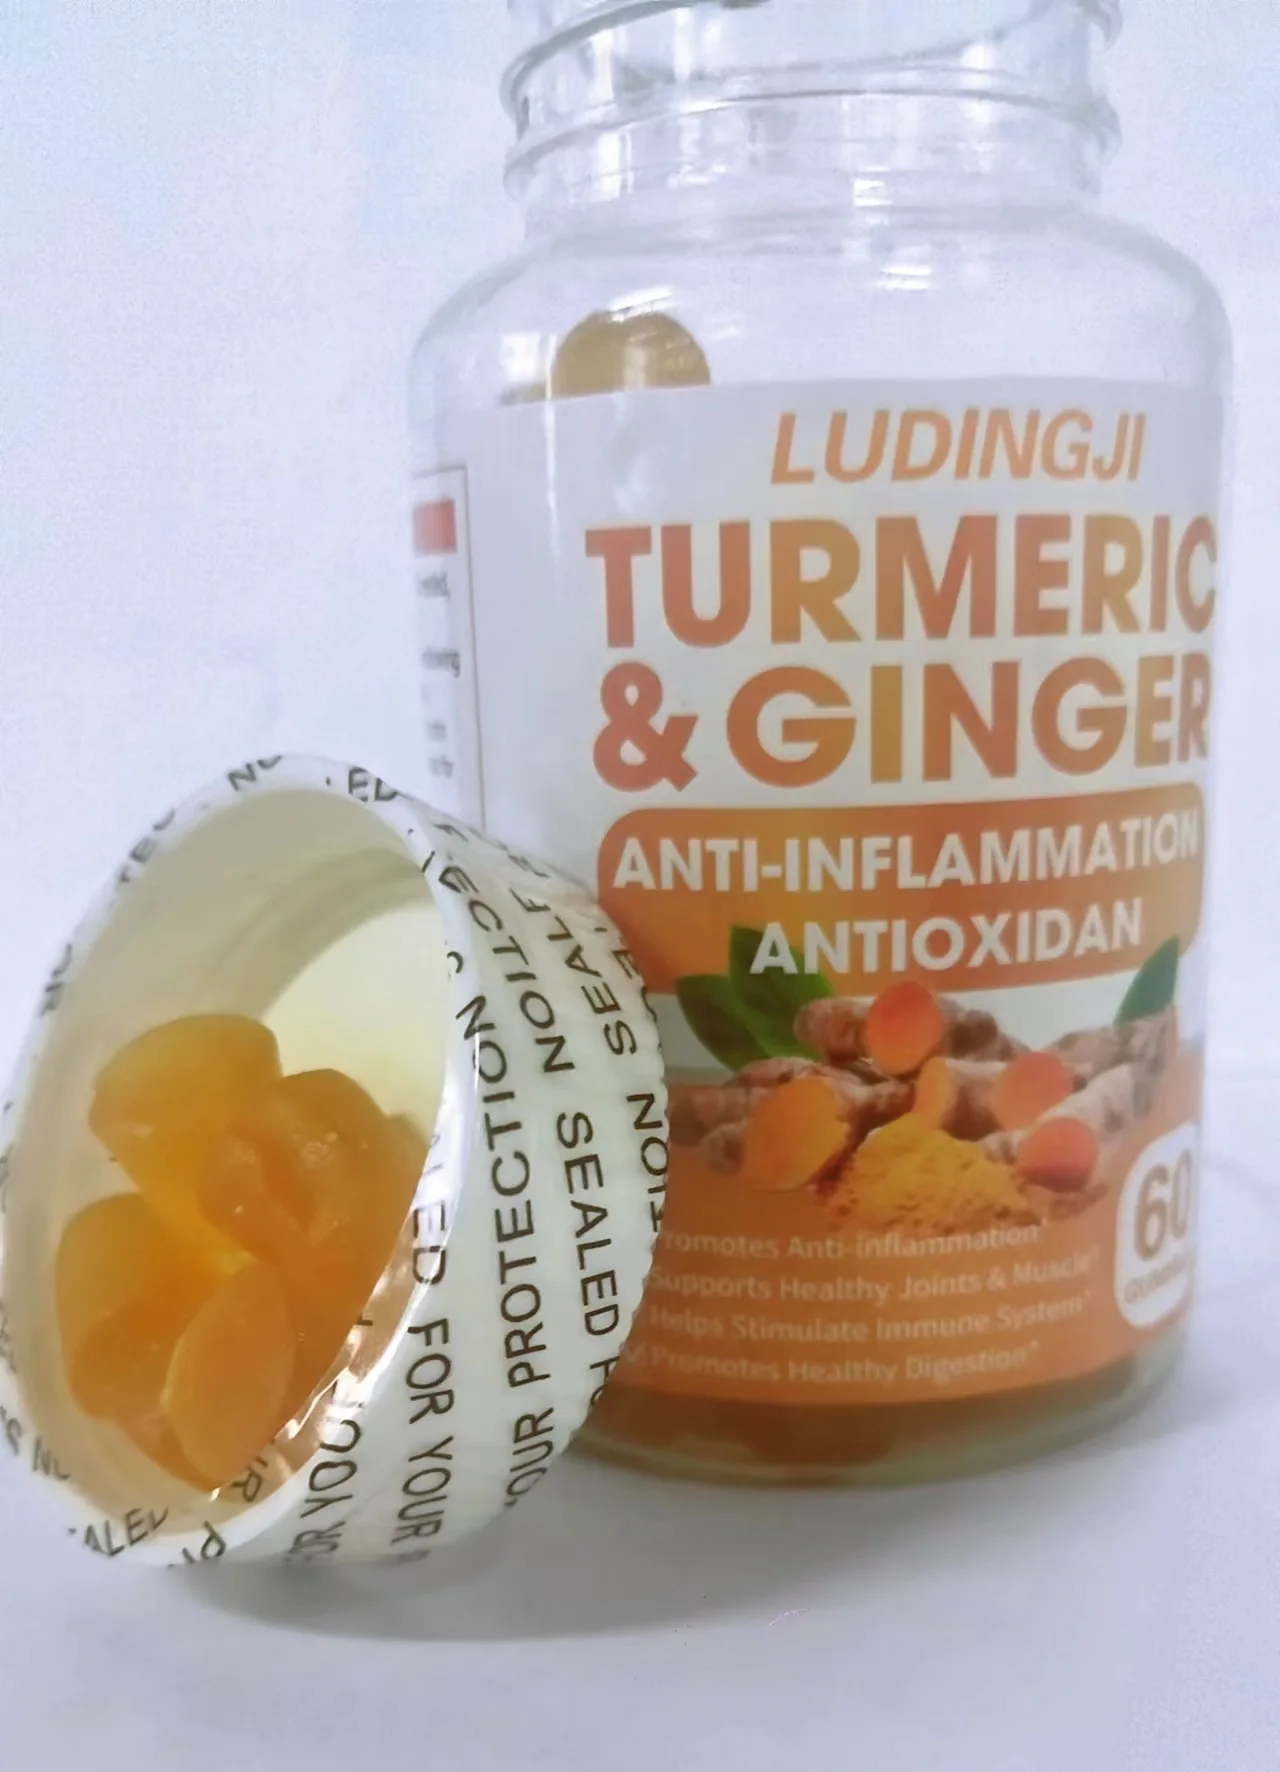 

60 Turmeric Ginger Curcumin Promotes Anti-inflammation Supports Healthy Joints & Muscle Helps Stimulate Immune System